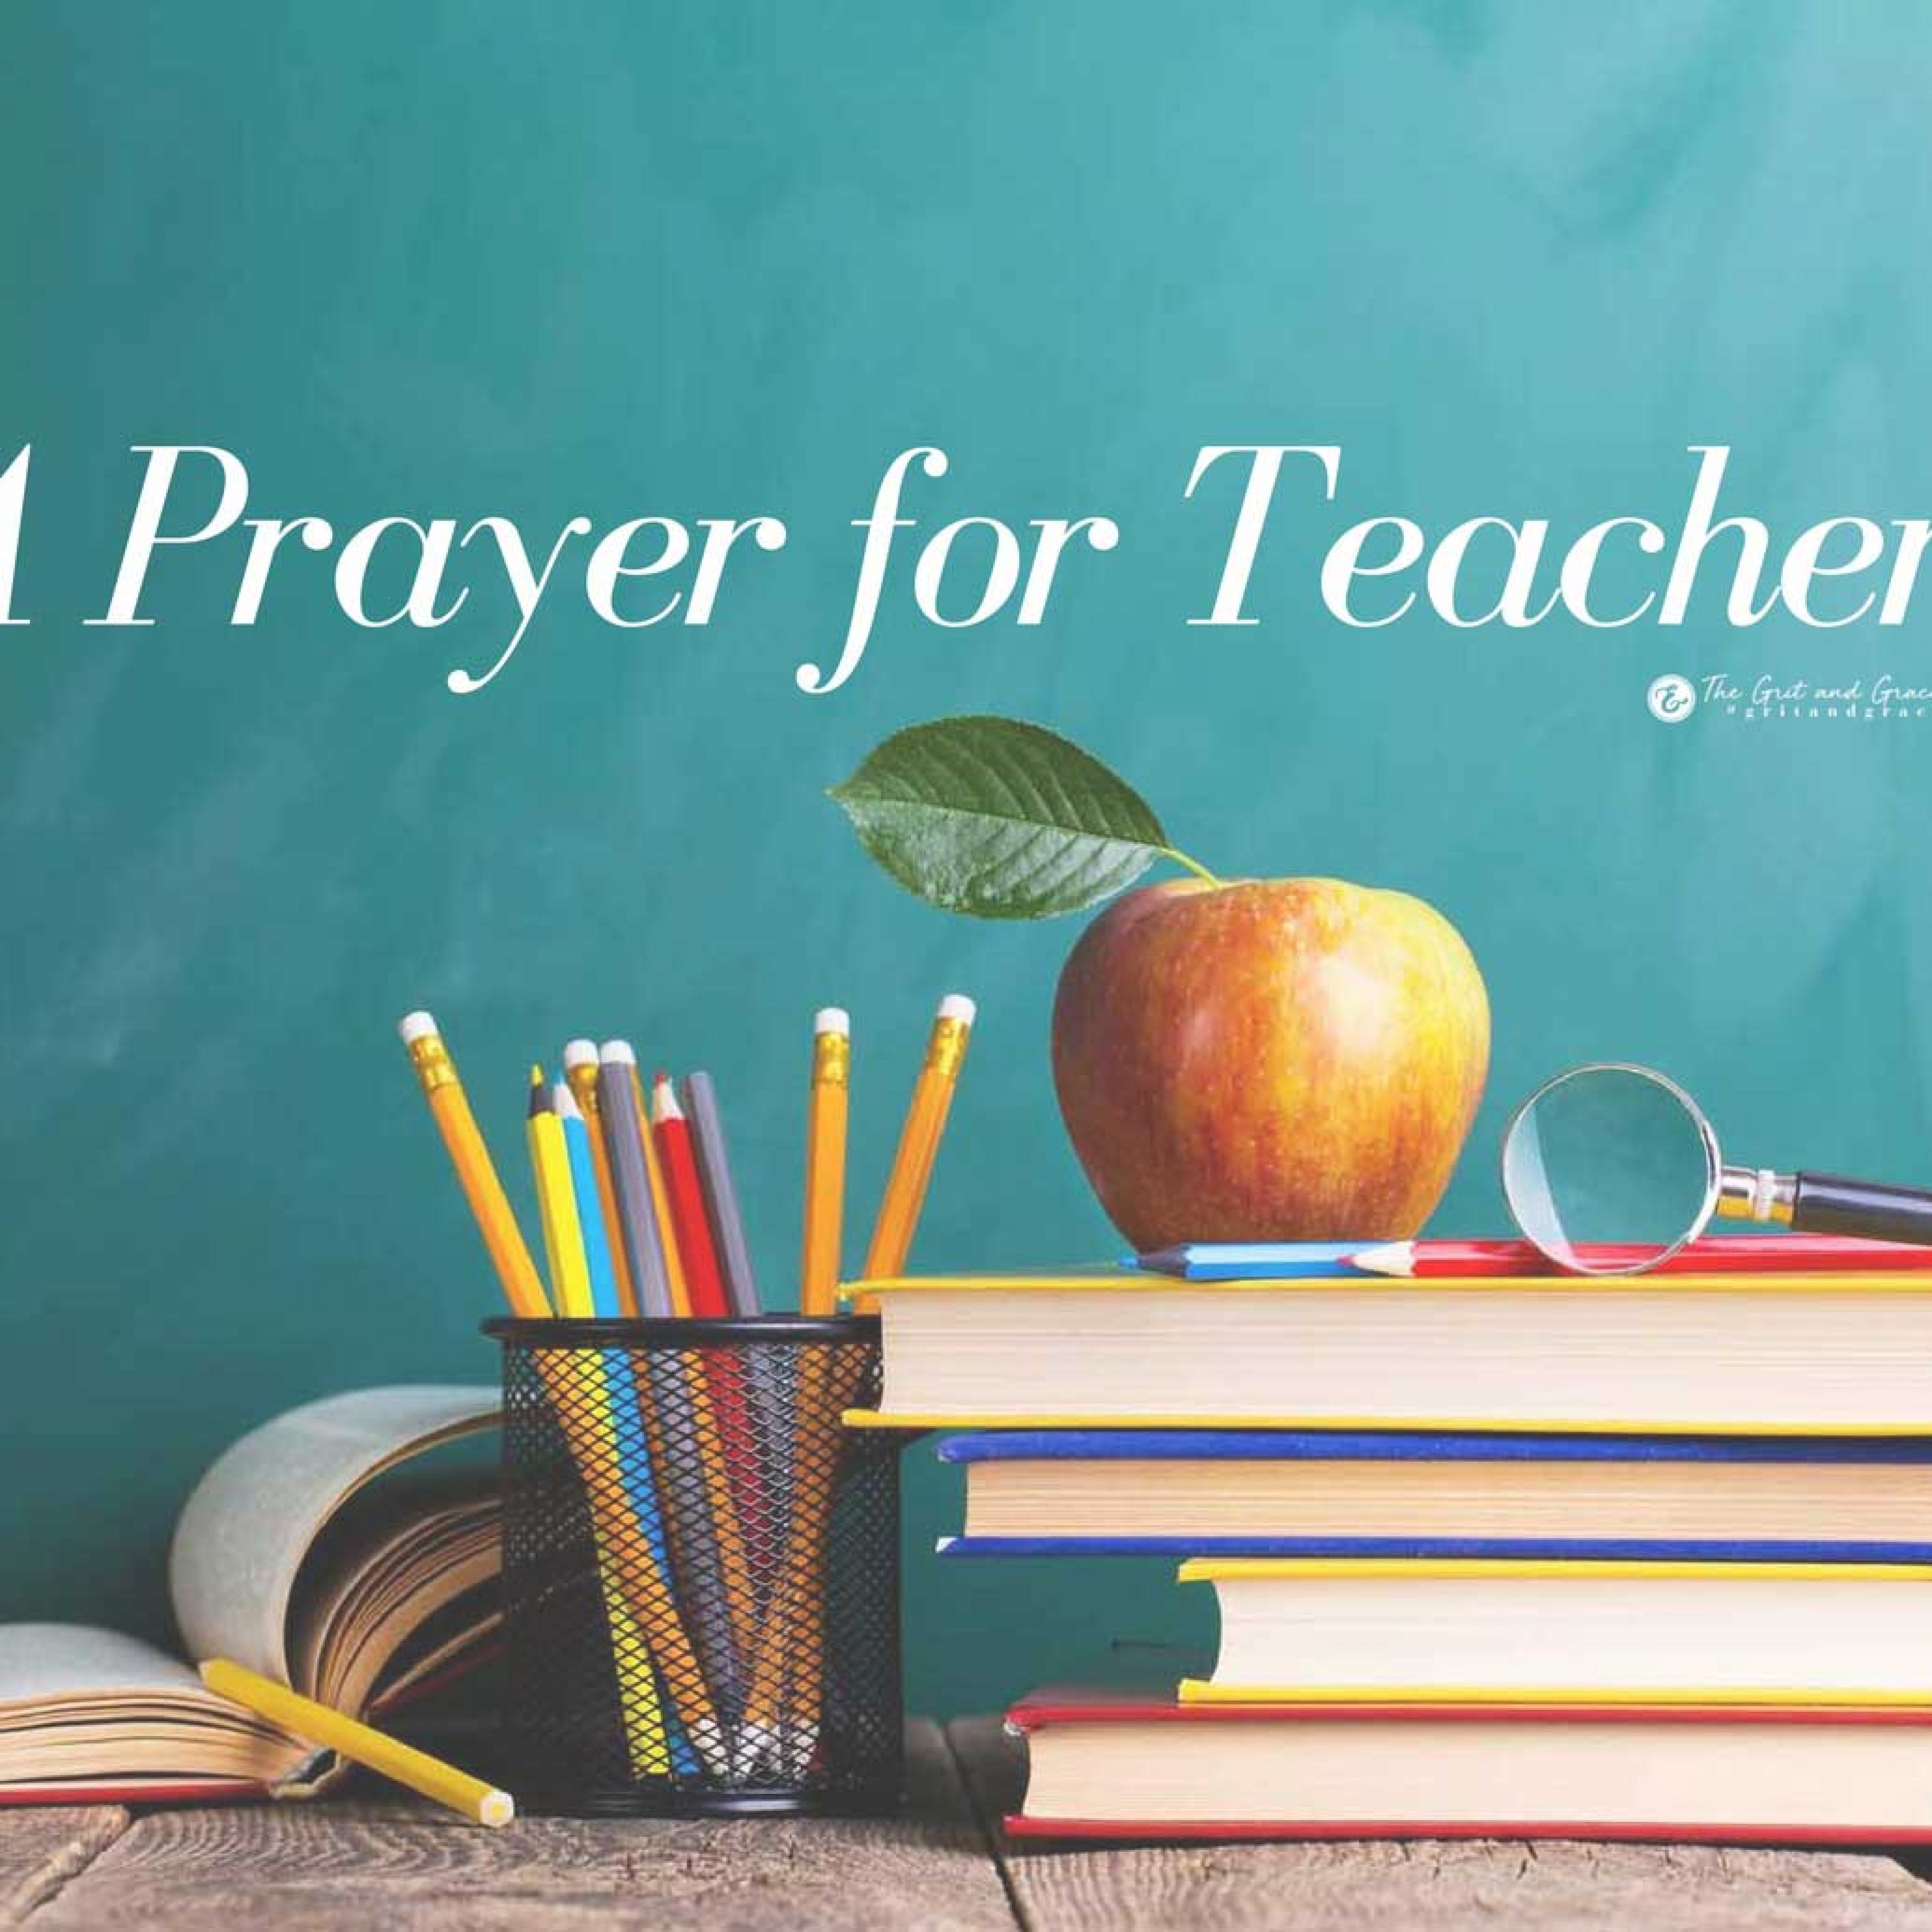 Teachers-We're-Praying-These-Things-For-You